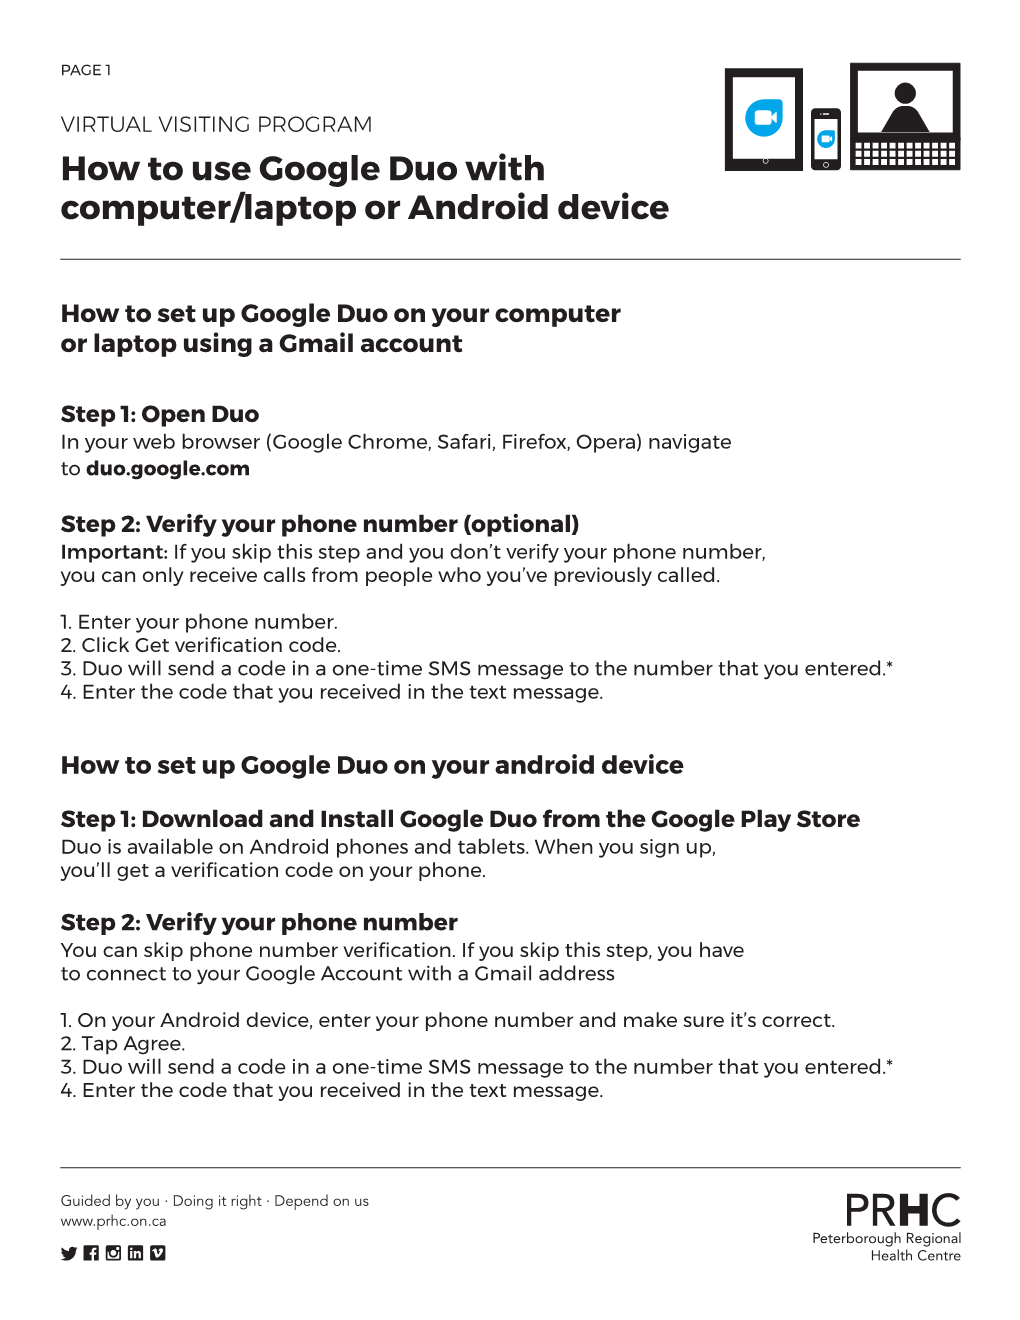 How to Use Google Duo with Computer/Laptop Or Android Device